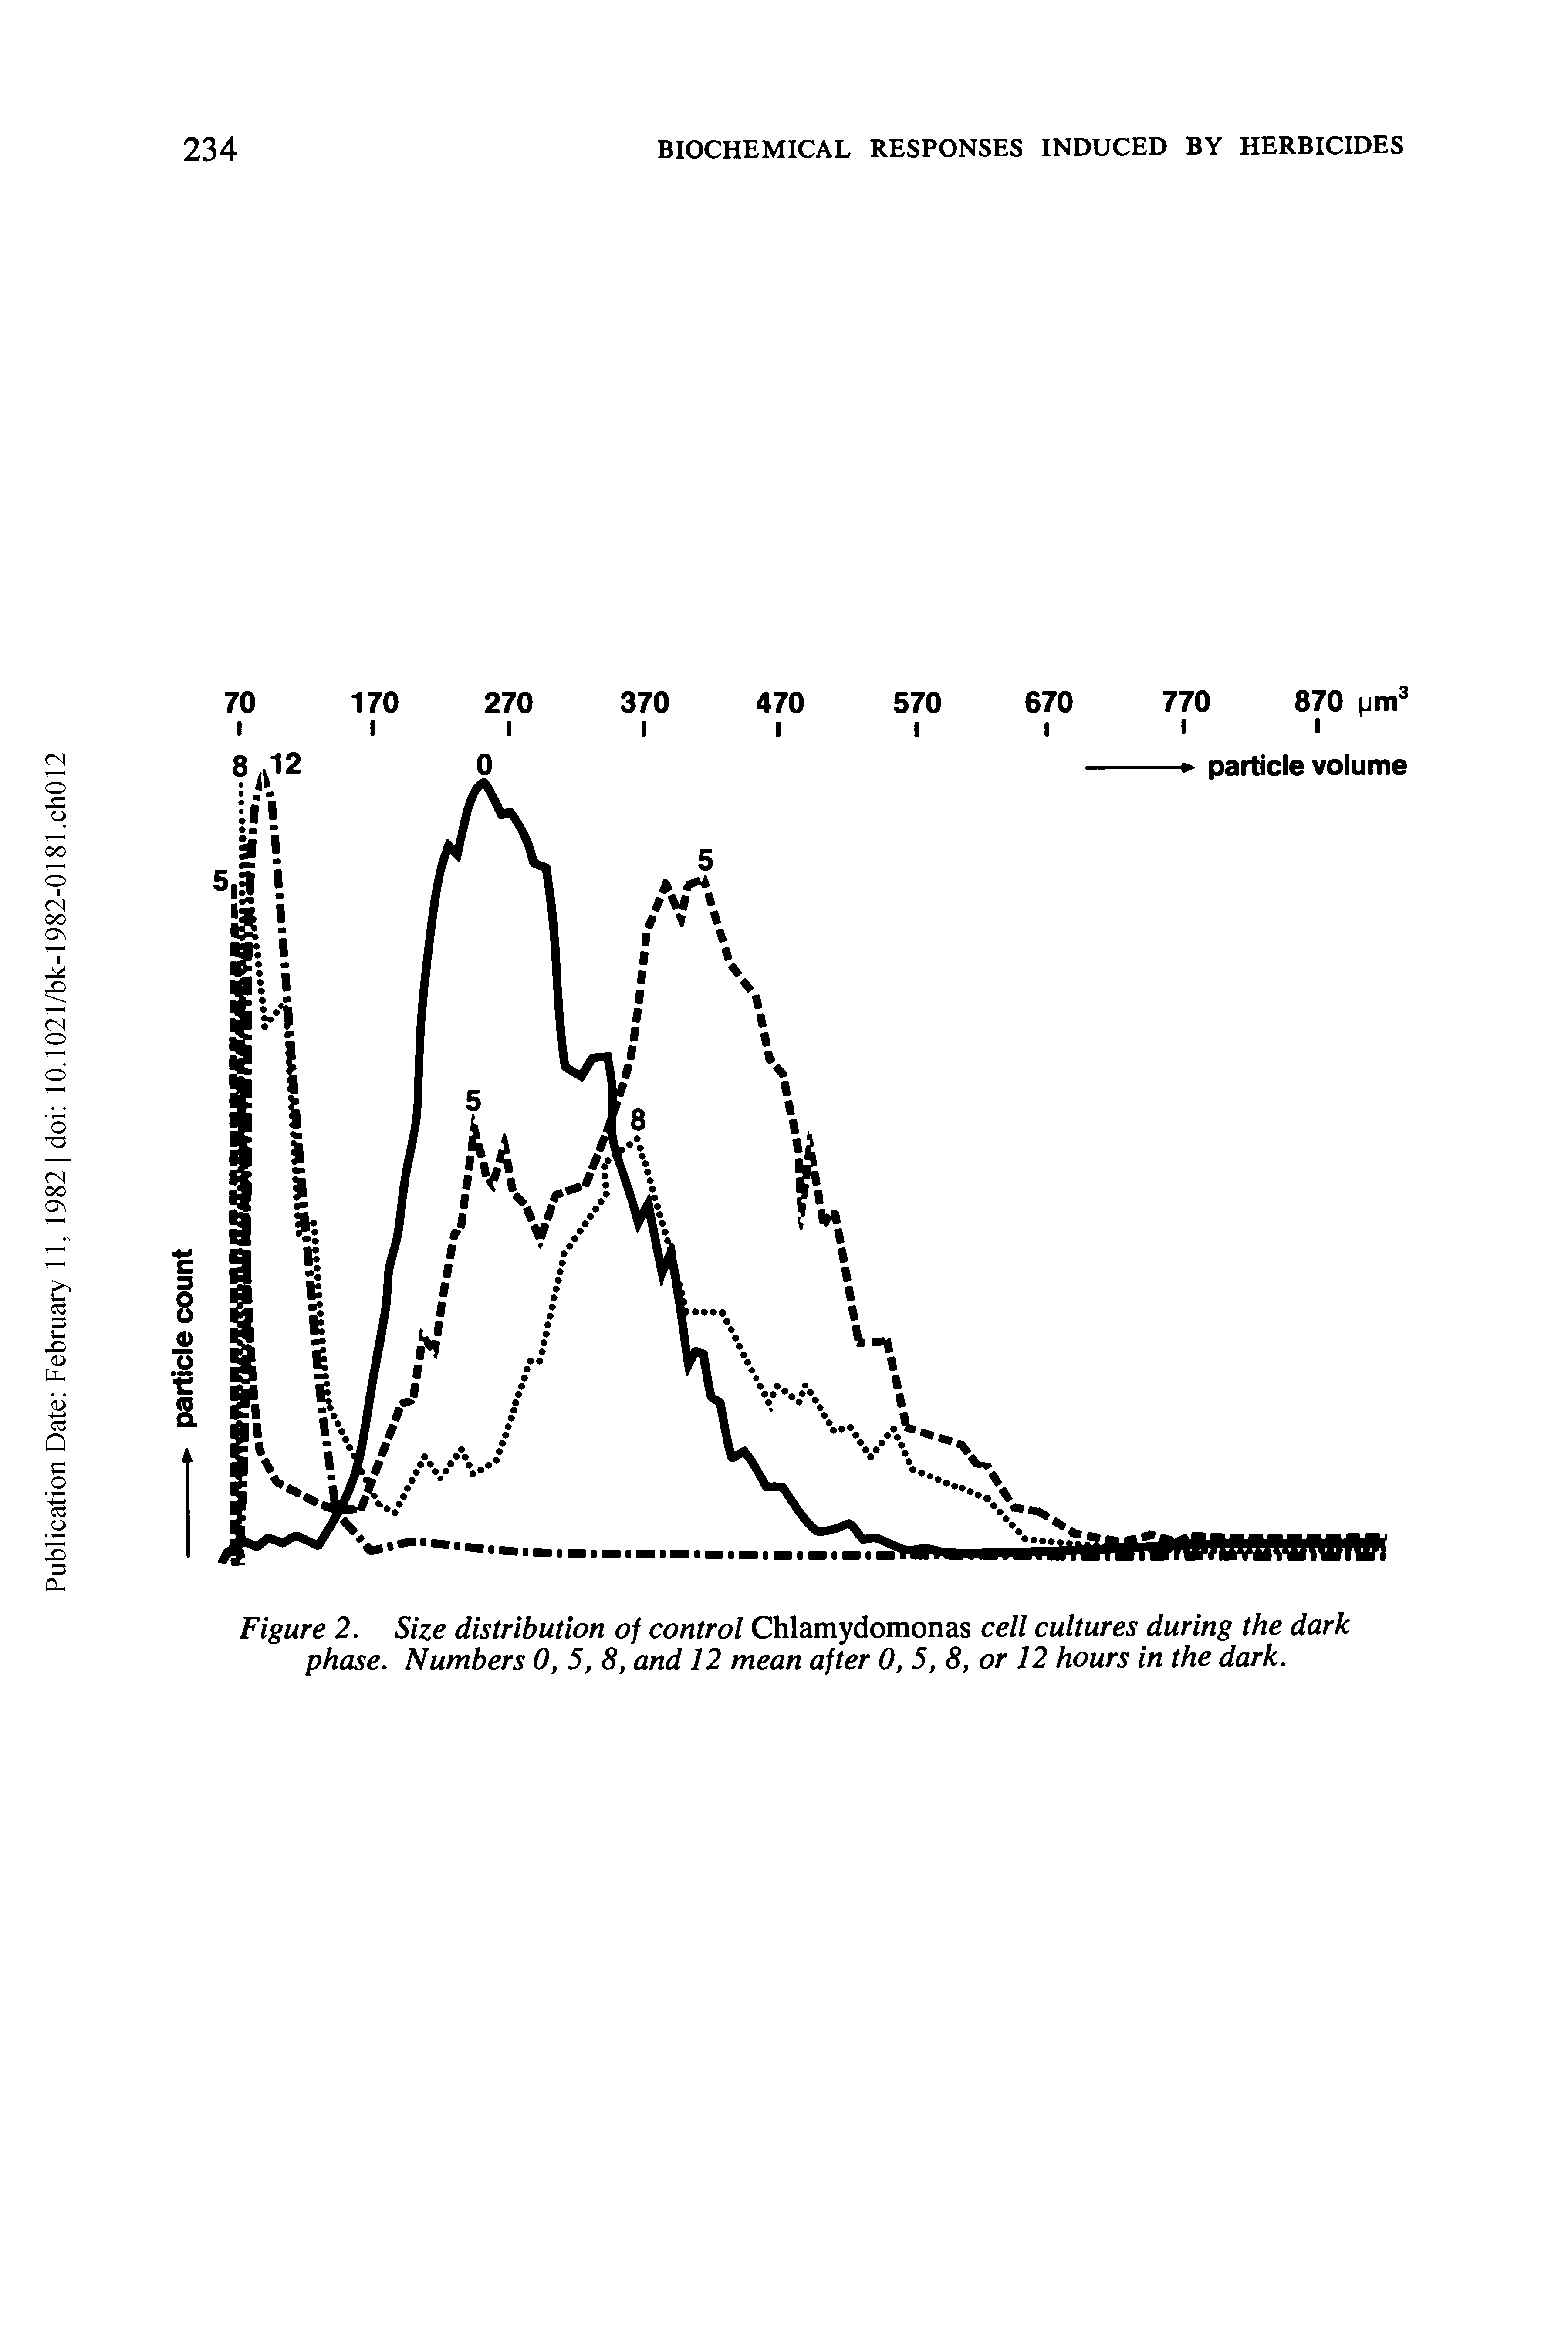 Figure 2. Size distribution of control Chlamydomonas cell cultures during the dark phase. Numbers 0, 5, 8, and 12 mean after 0, 5, 8, or 12 hours in the dark.